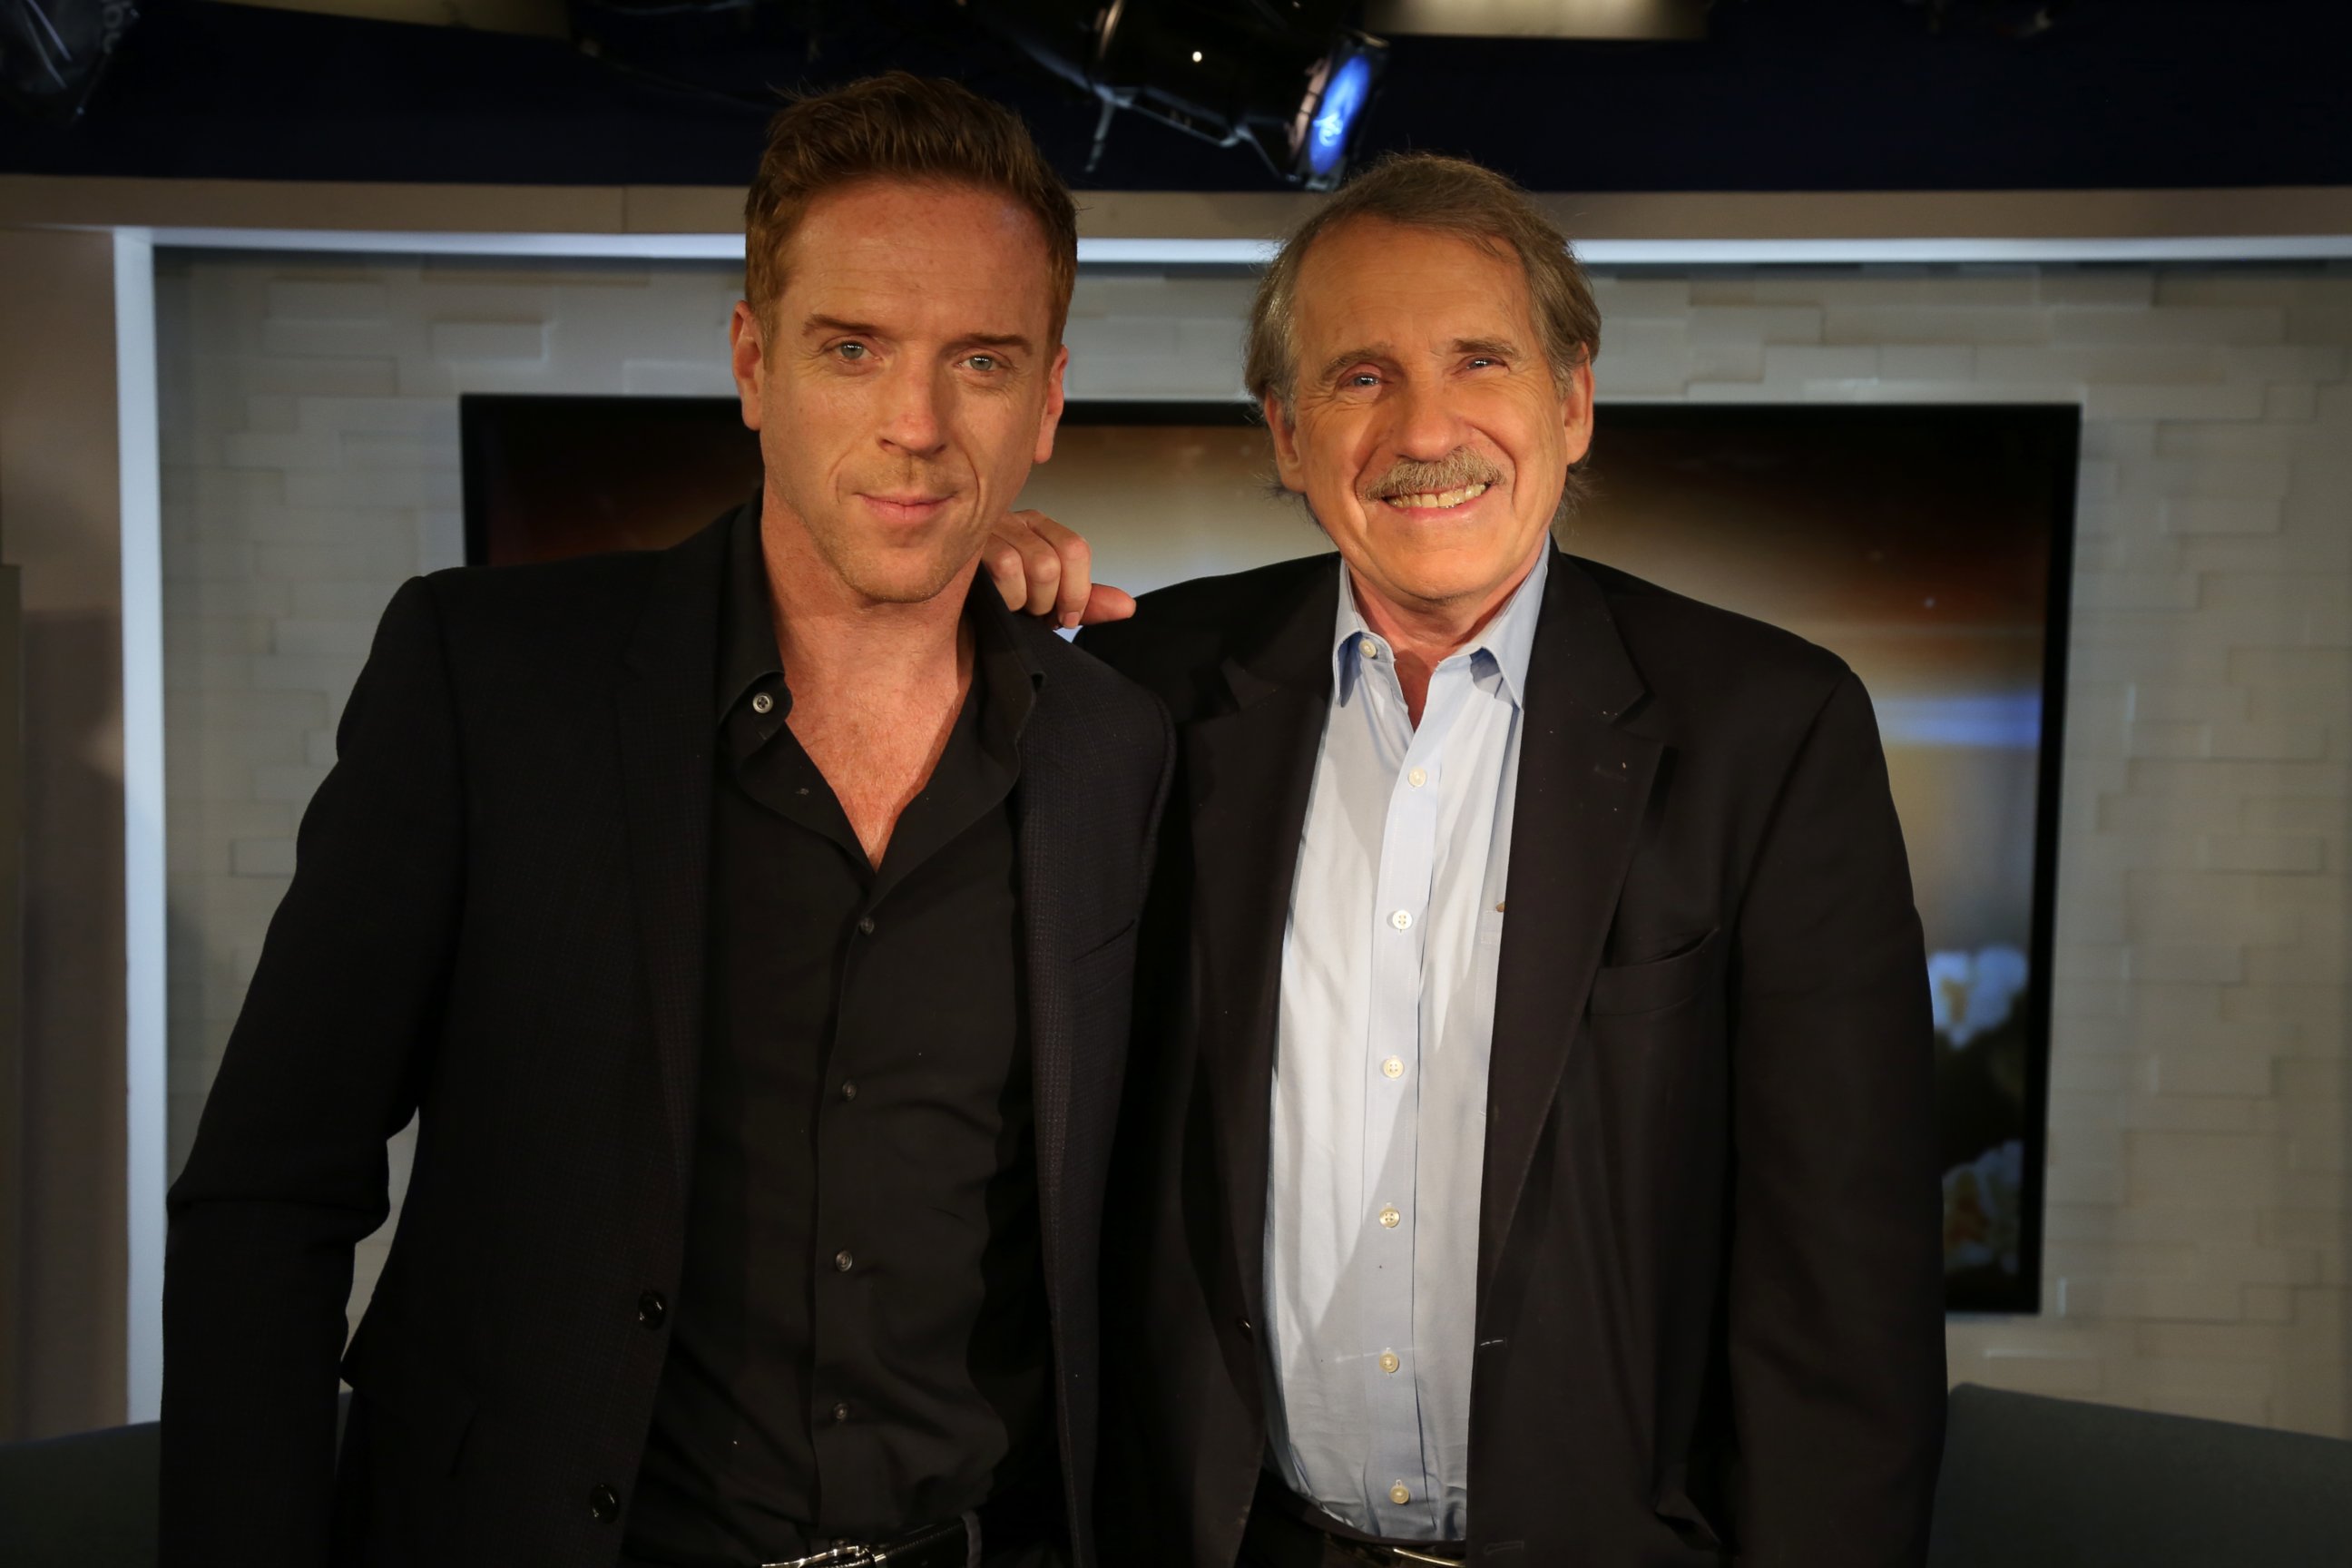 PHOTO: Damian Lewis stopped by ABC News' "Popcorn with Peter Travers" to discuss the film "Our Kind of Traitor."